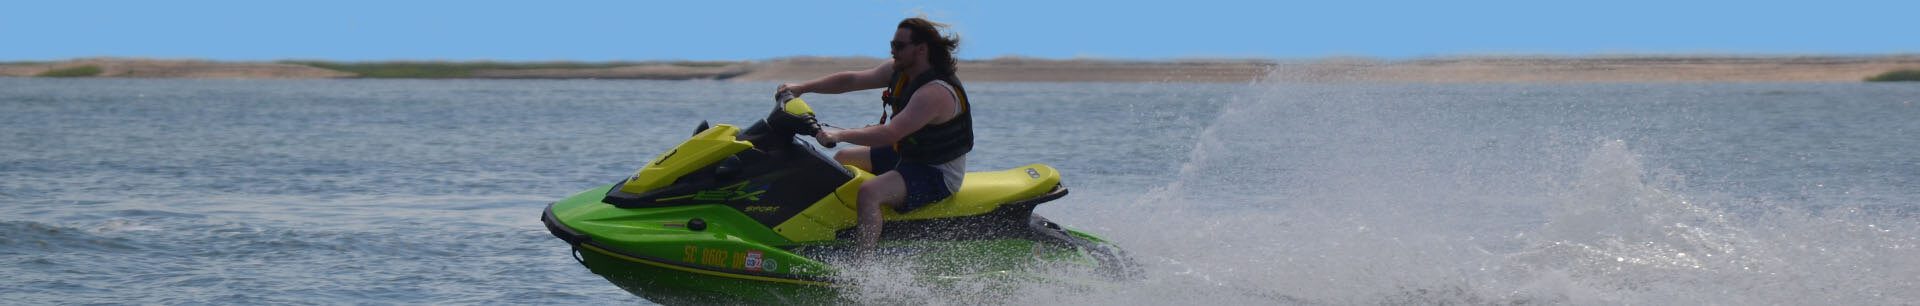 A man riding a blue and yellow jet ski against a sea and beach background.